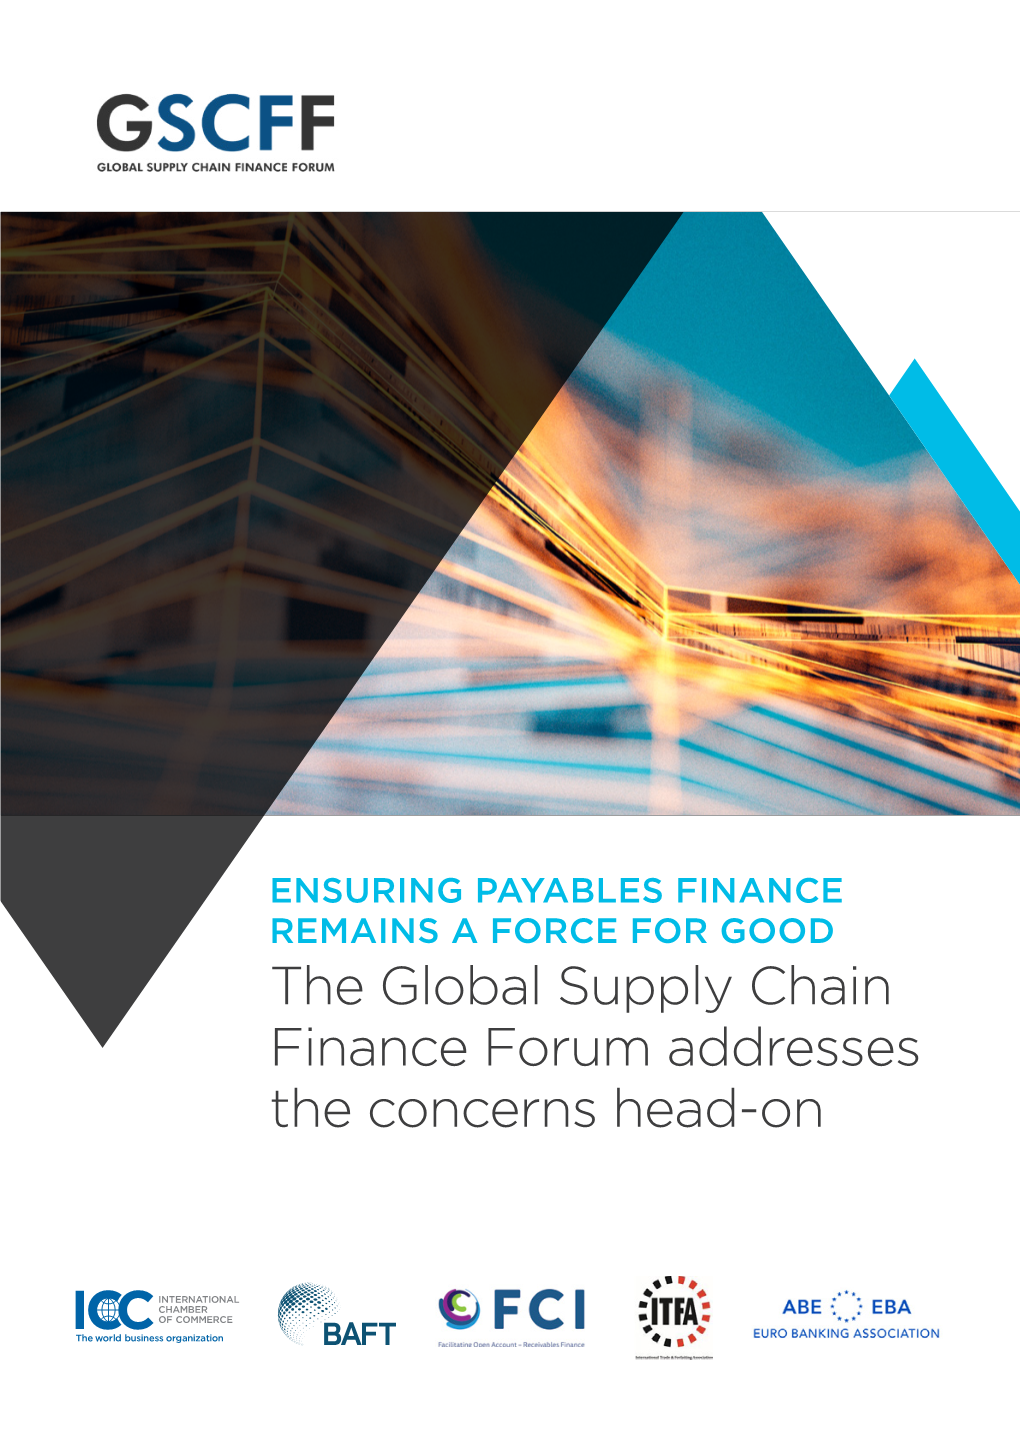 The Global Supply Chain Finance Forum Addresses the Concerns